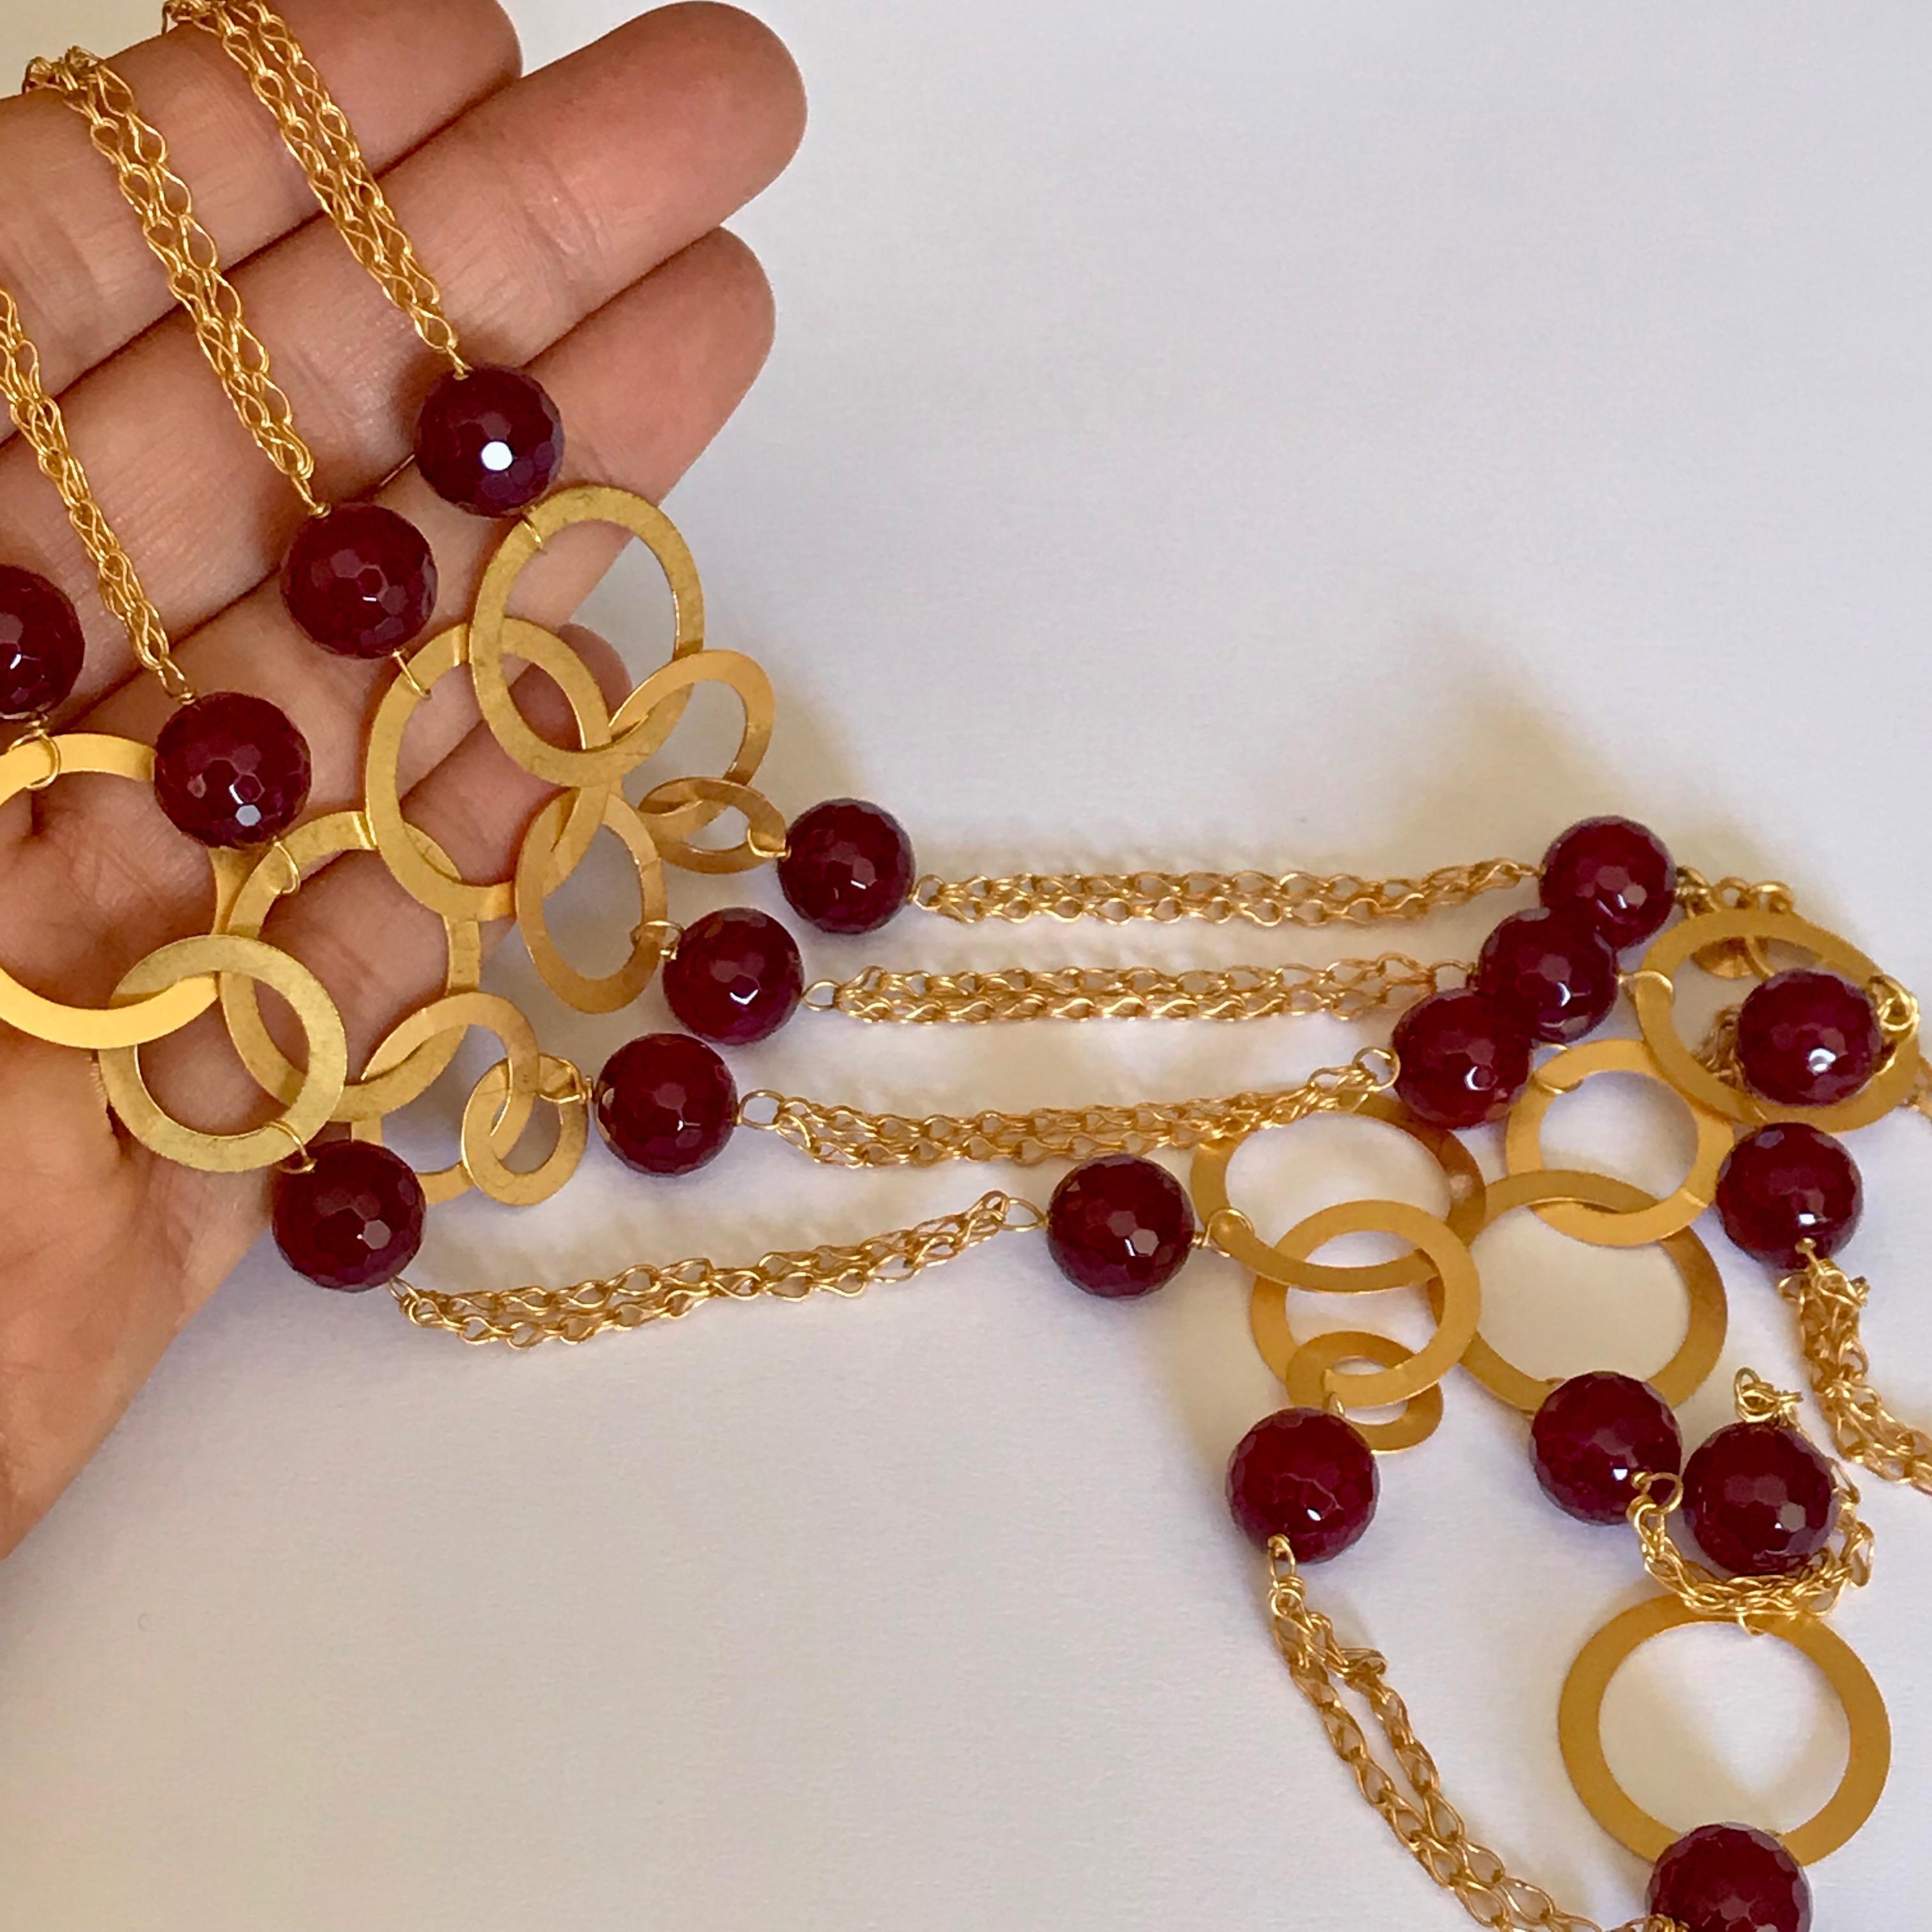 18 Karat Solid Yellow Gold Handmade Cranberry Agate Chain Necklace For Sale 2